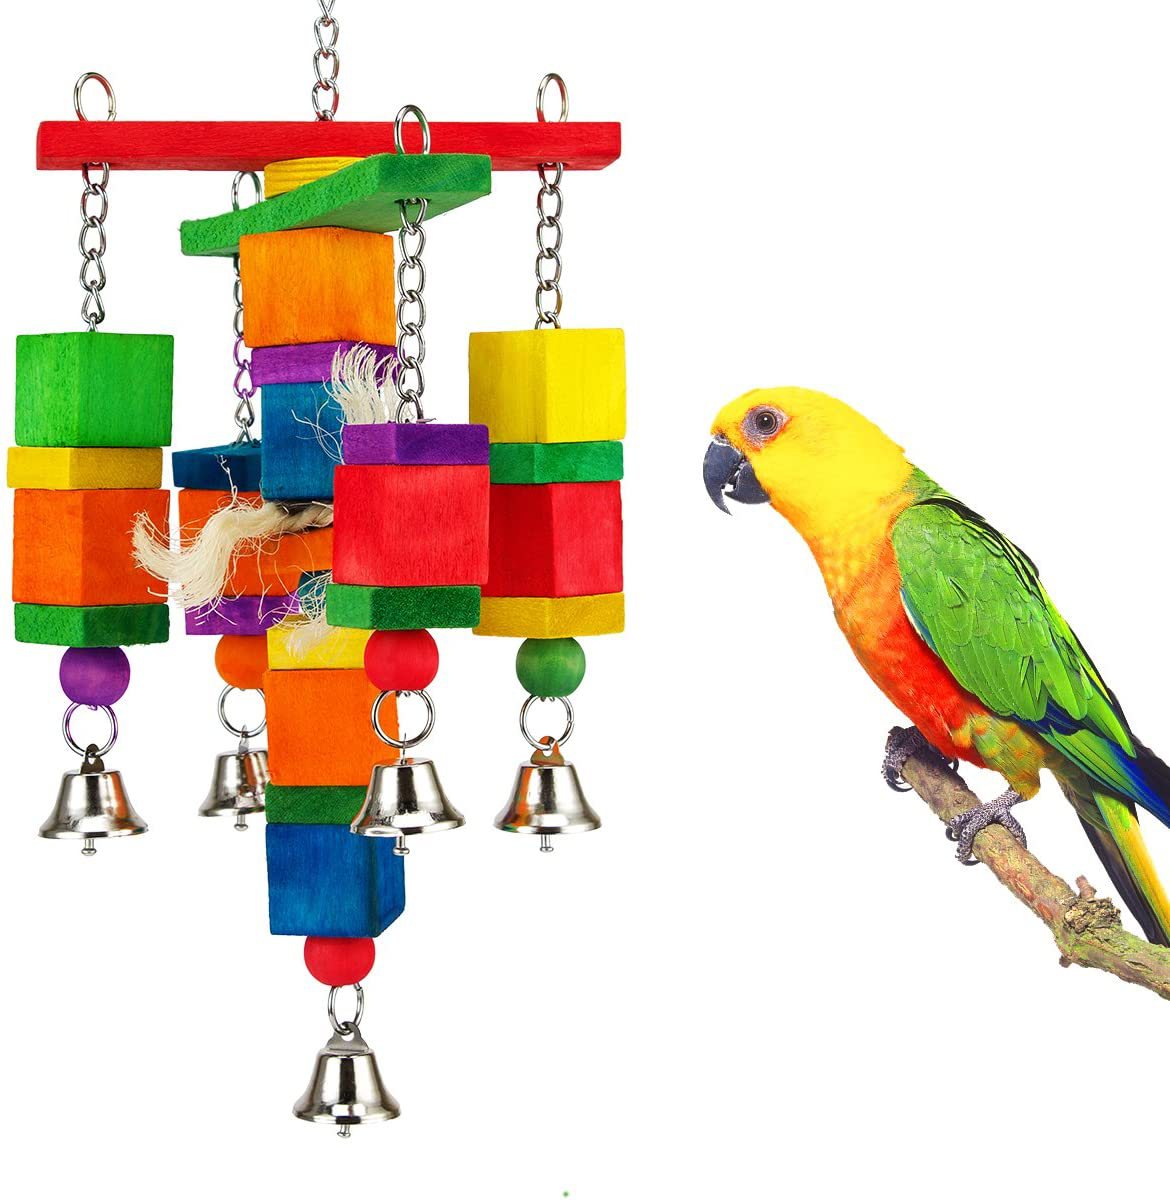 MEWTOGO Natural Wood Bird Parrot Swing Chewing Toys- Hanging Bell Bird Chew Bite Cage Stand Toys for Parakeets Cockatiels Conures Love Birds Finches Budgie Small to Medium Sized Birds